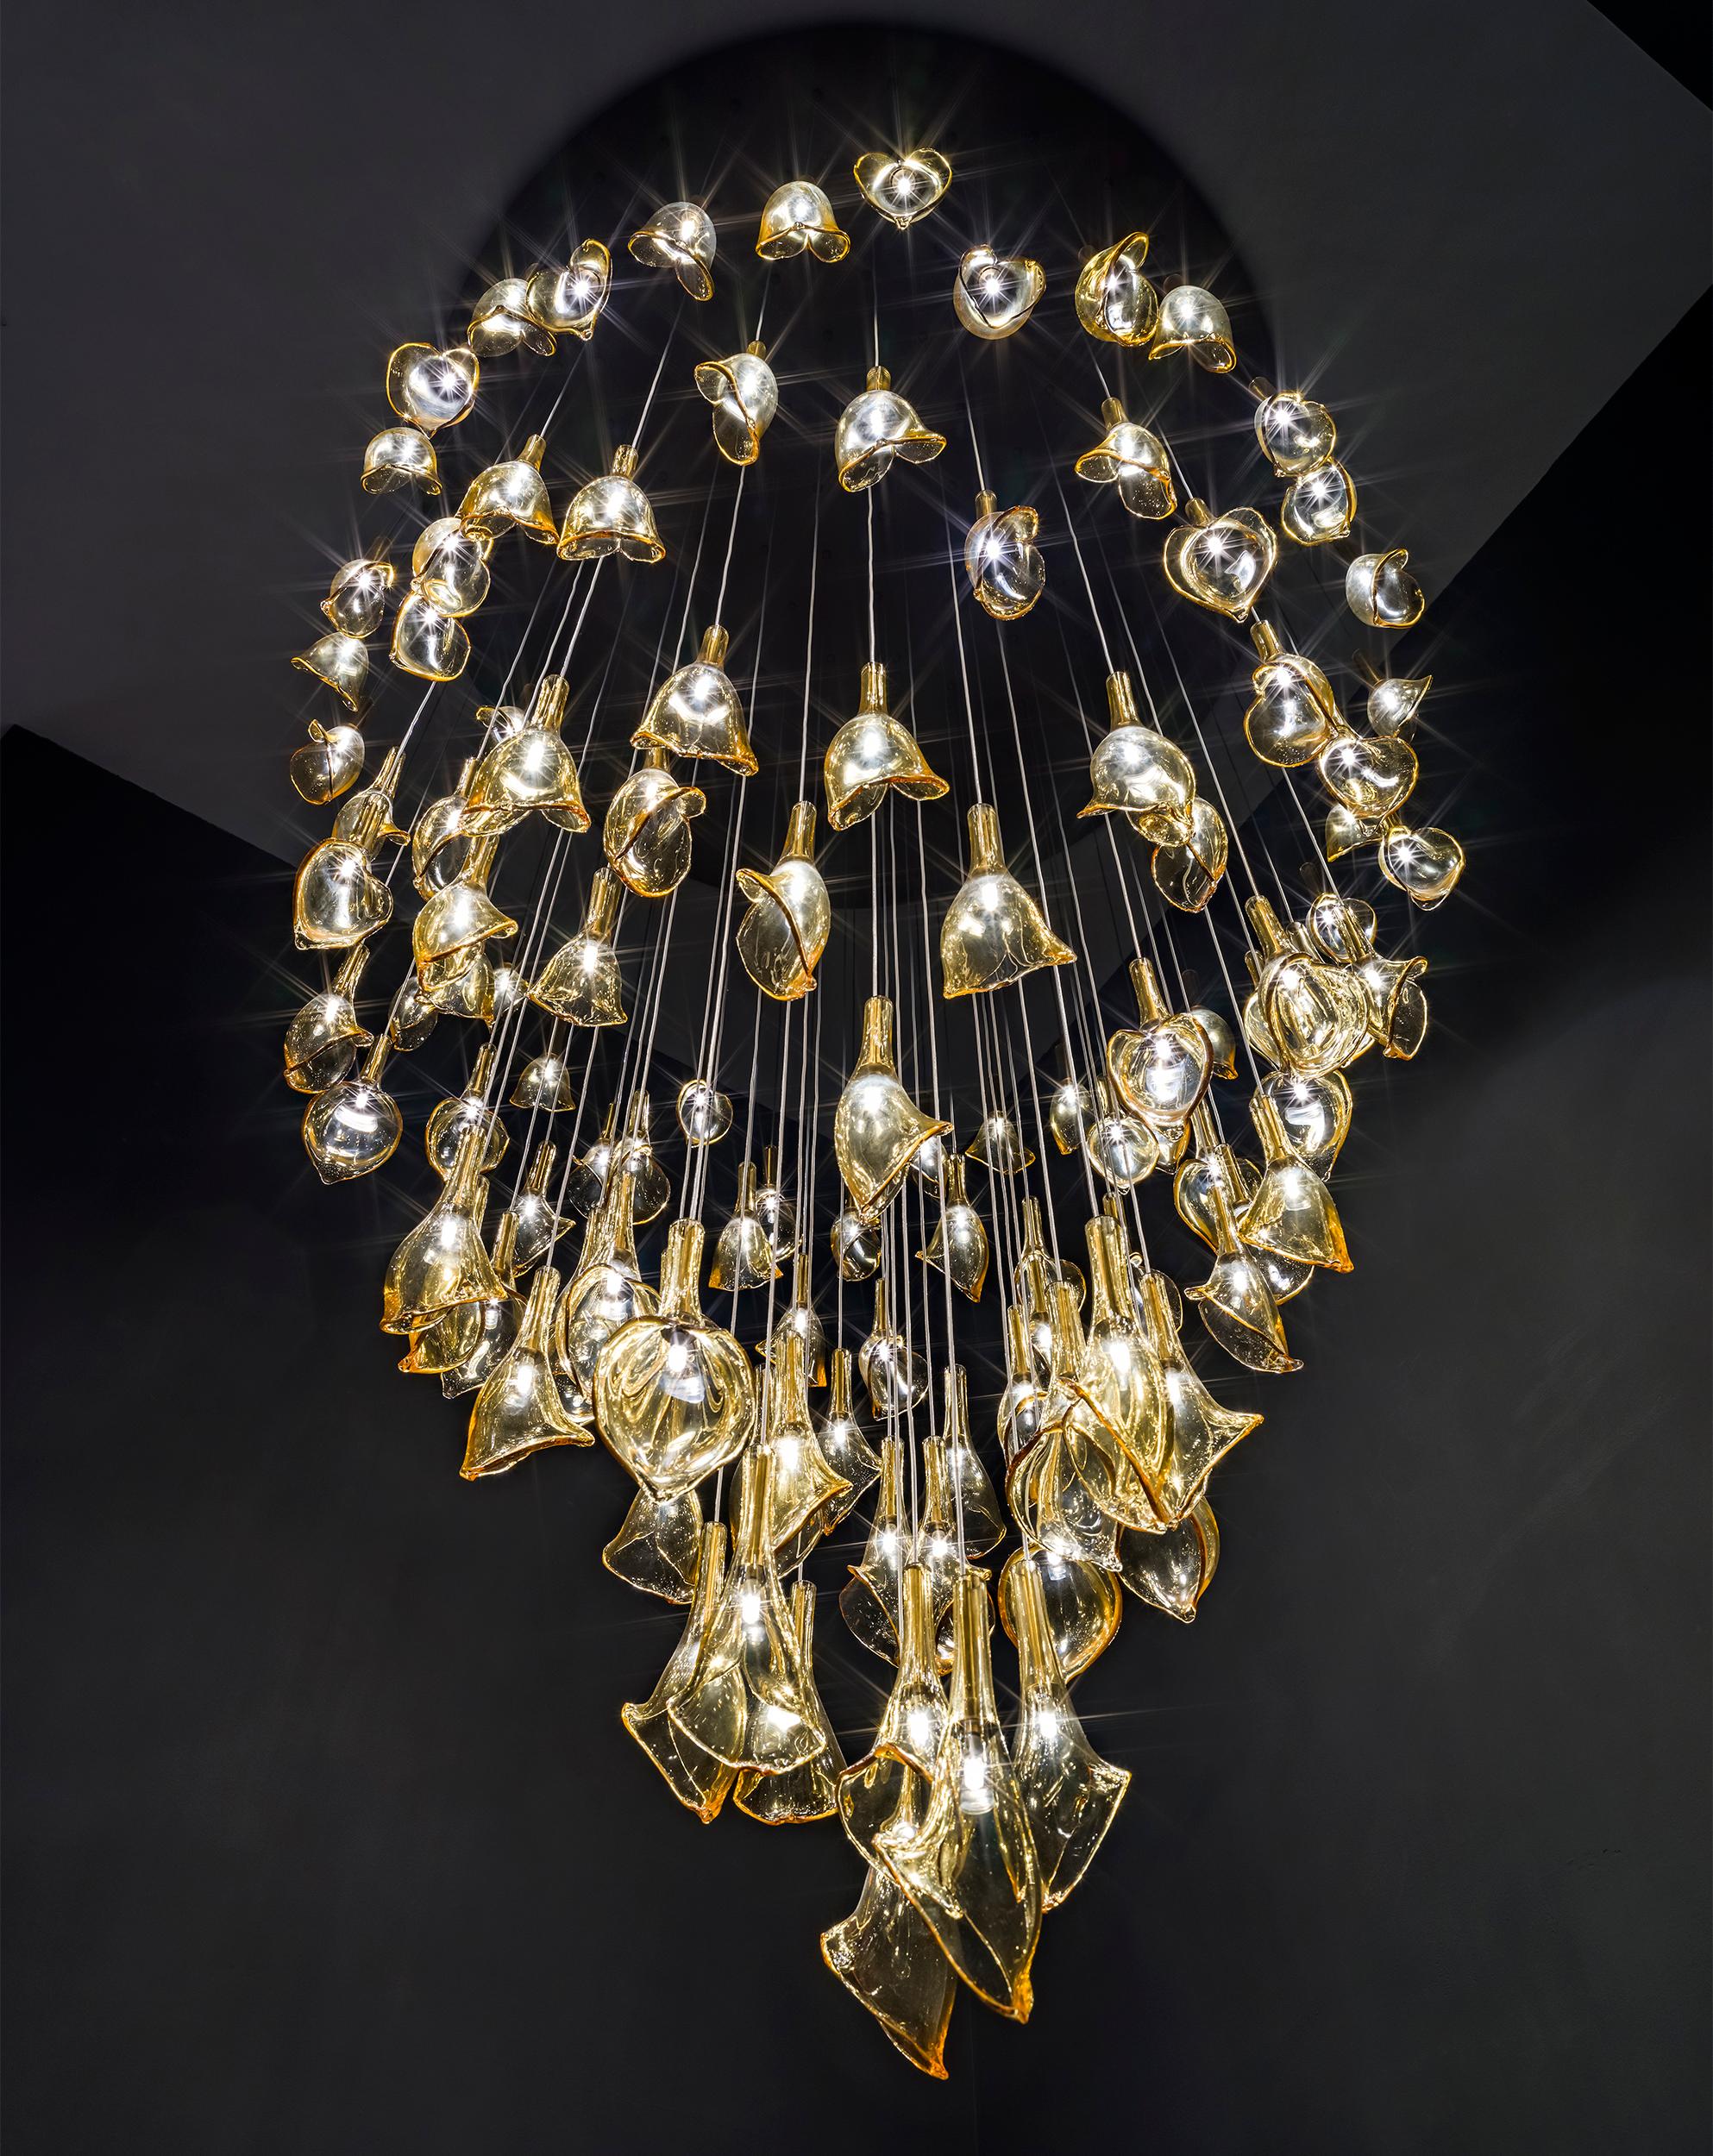 Huge Artistic Ceiling Lighting, Pendant chandelier Acacia-coloured blow glass drops by Multiforme, wide 140 cm by height 260 cm.

Italian craftsmanship is by nature devoted to Beauty, of which the collection we have called ‘Destin Charmè’ is a